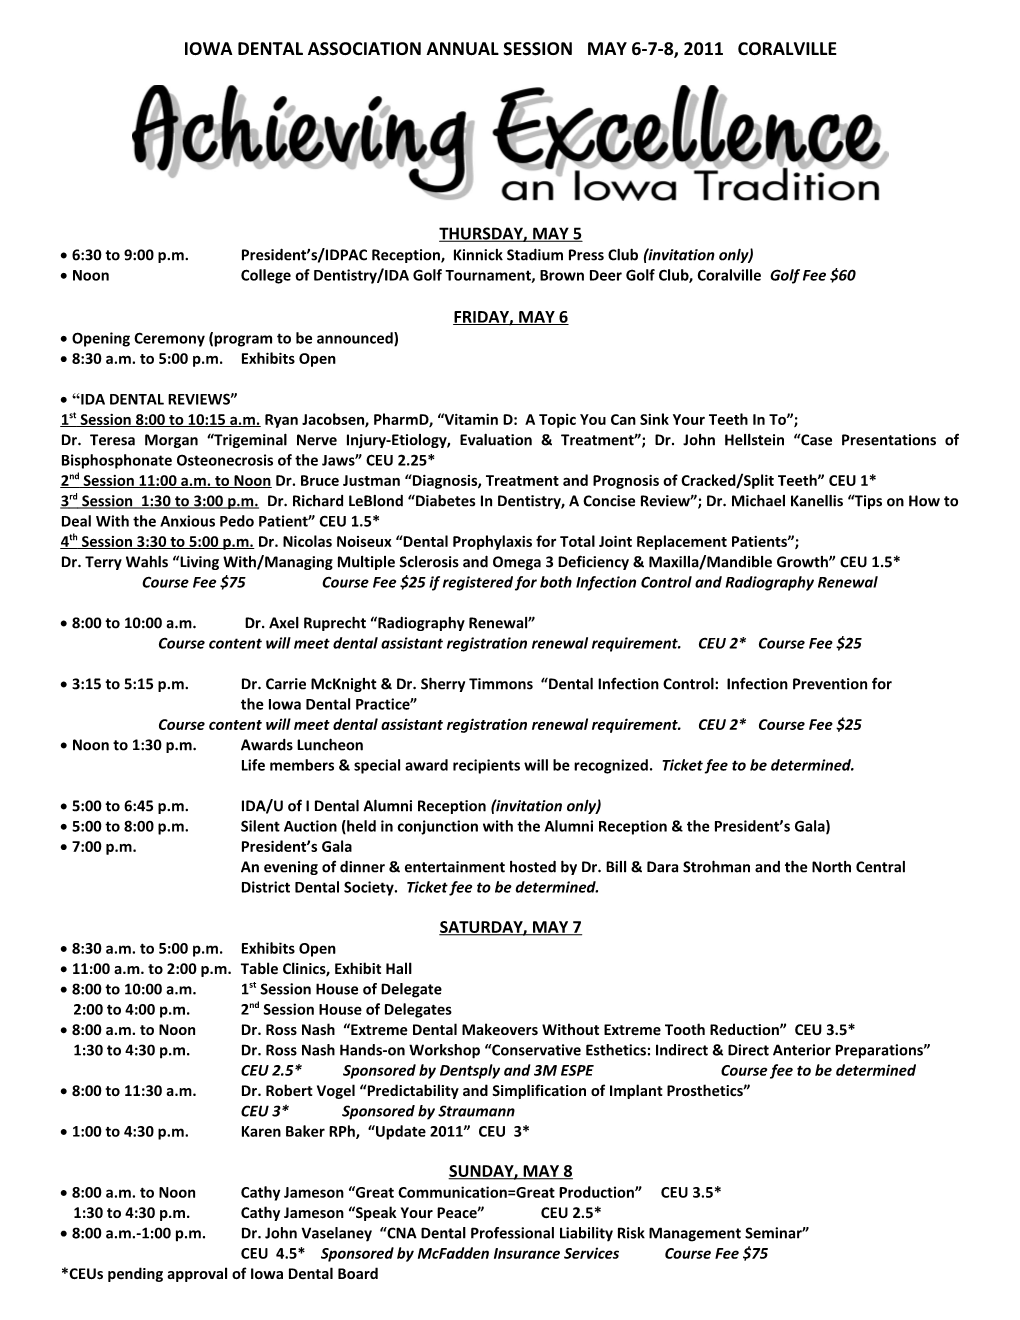 Iowa Dental Association Annual Session May 6-7-8, 2011 Coralville